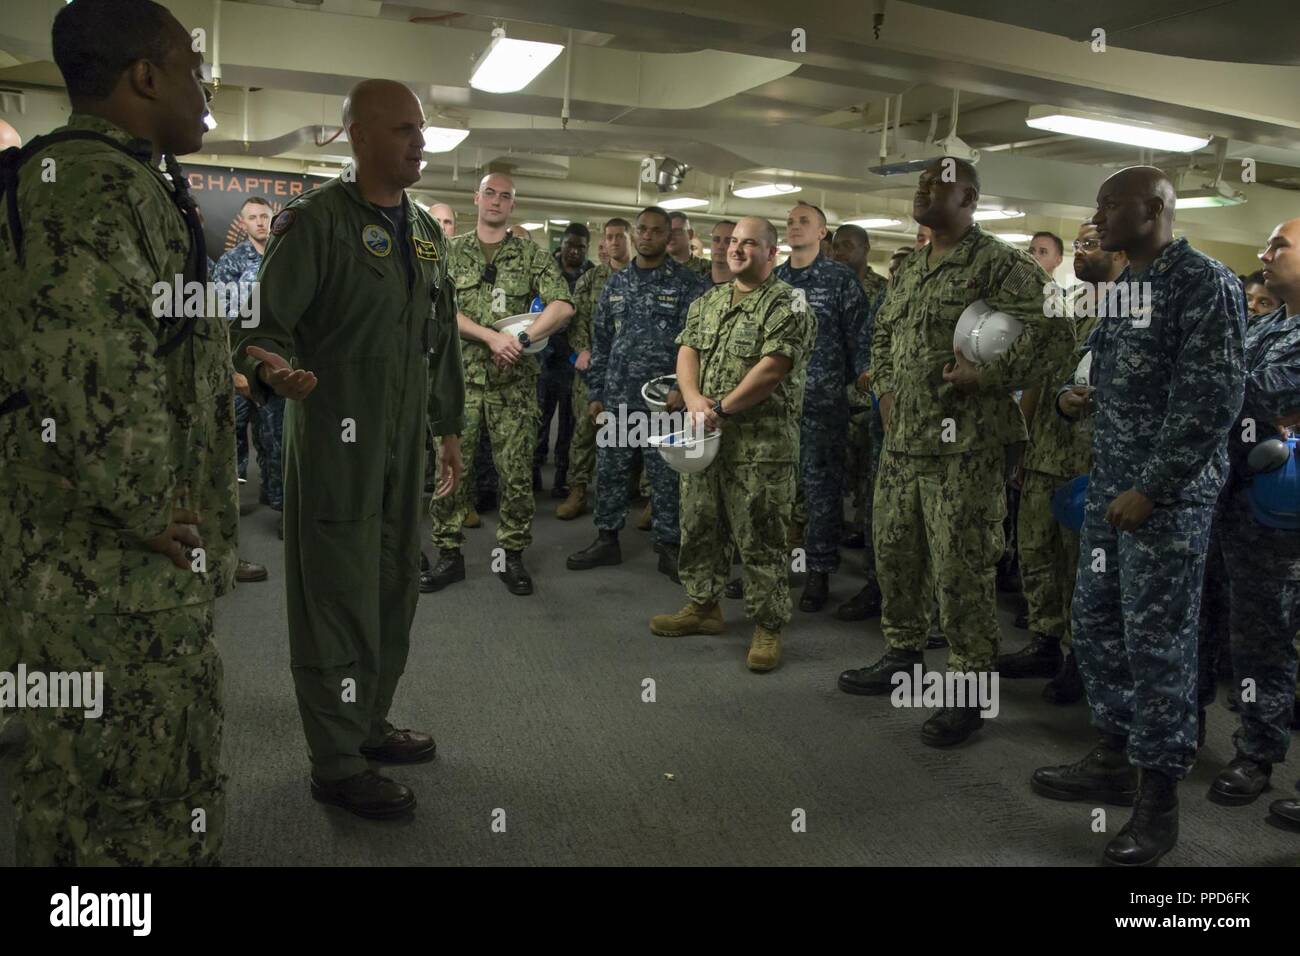 NEWPORT NEWS, Va. (Aug. 23, 2018) Capt. John J. Cummings, USS Gerald R. Ford's (CVN 78) commanding officer, addresses weapons department after Aviation Ordnanceman 1st Class Donald Harris, from Tallahassee, Fla., was awarded Aviation Ordnanceman of the Year. Harris will be promoted to chief petty officer next month. Stock Photo